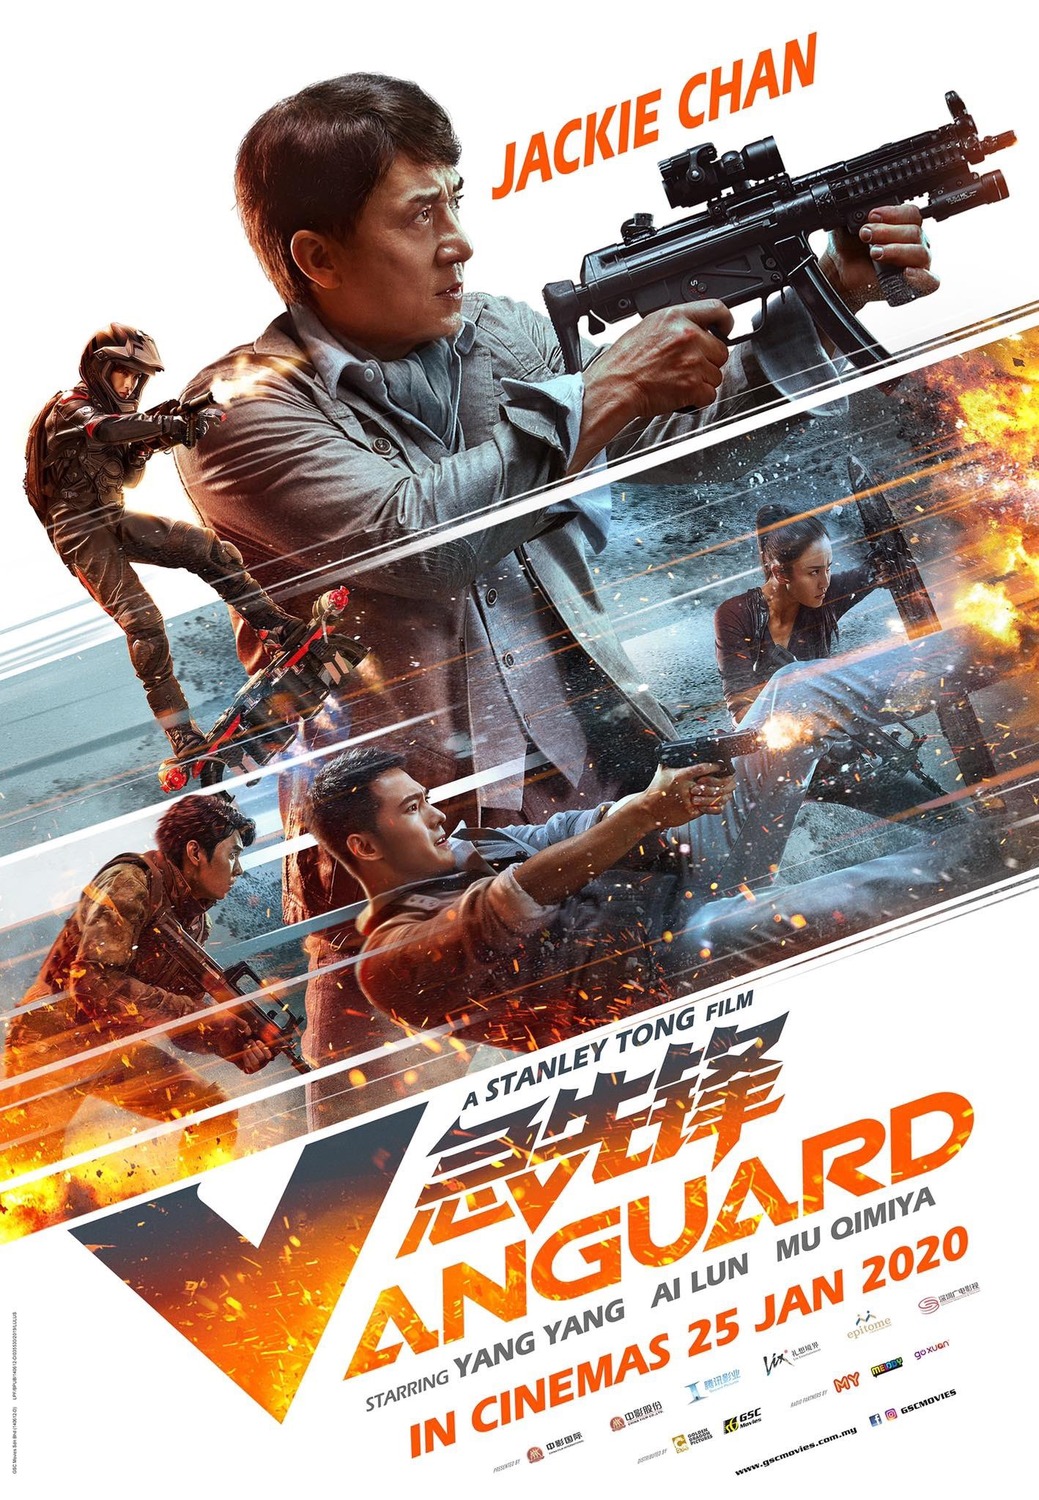 Extra Large Movie Poster Image for Vanguard (#4 of 6)